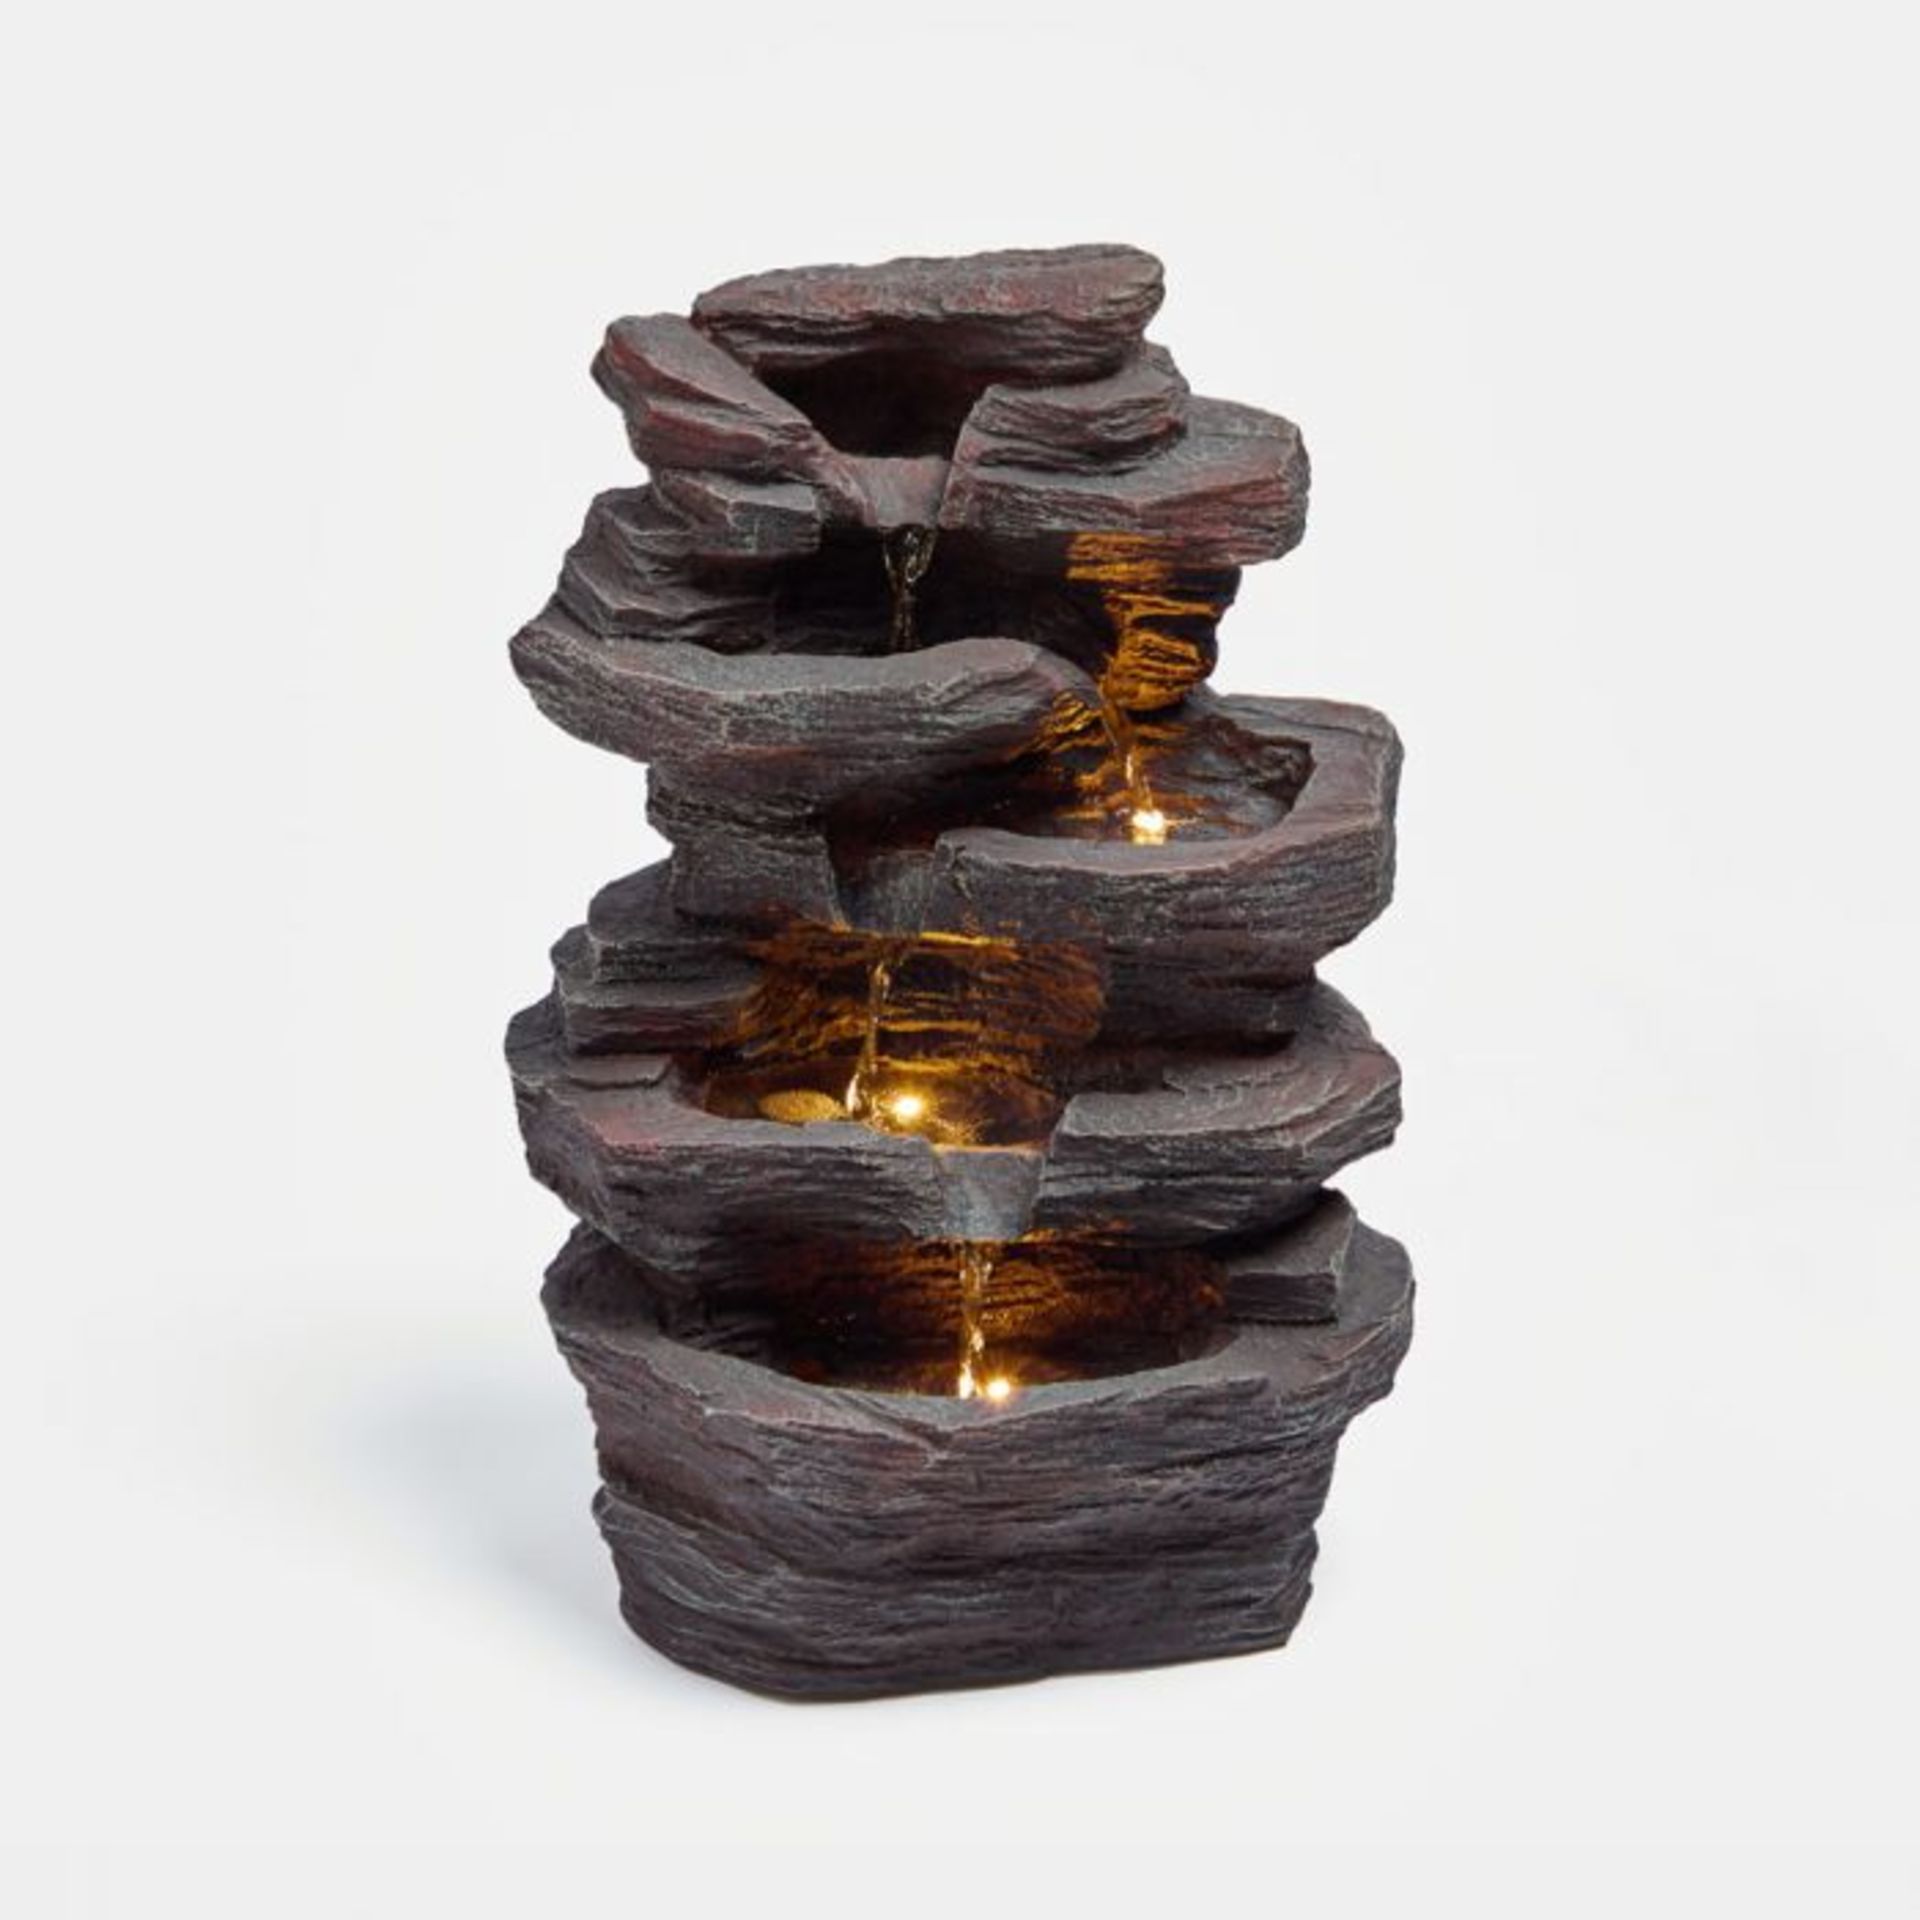 4 Tier Natural Rock Water Feature. The perfect meditative accessory to add a feeling of calm to your